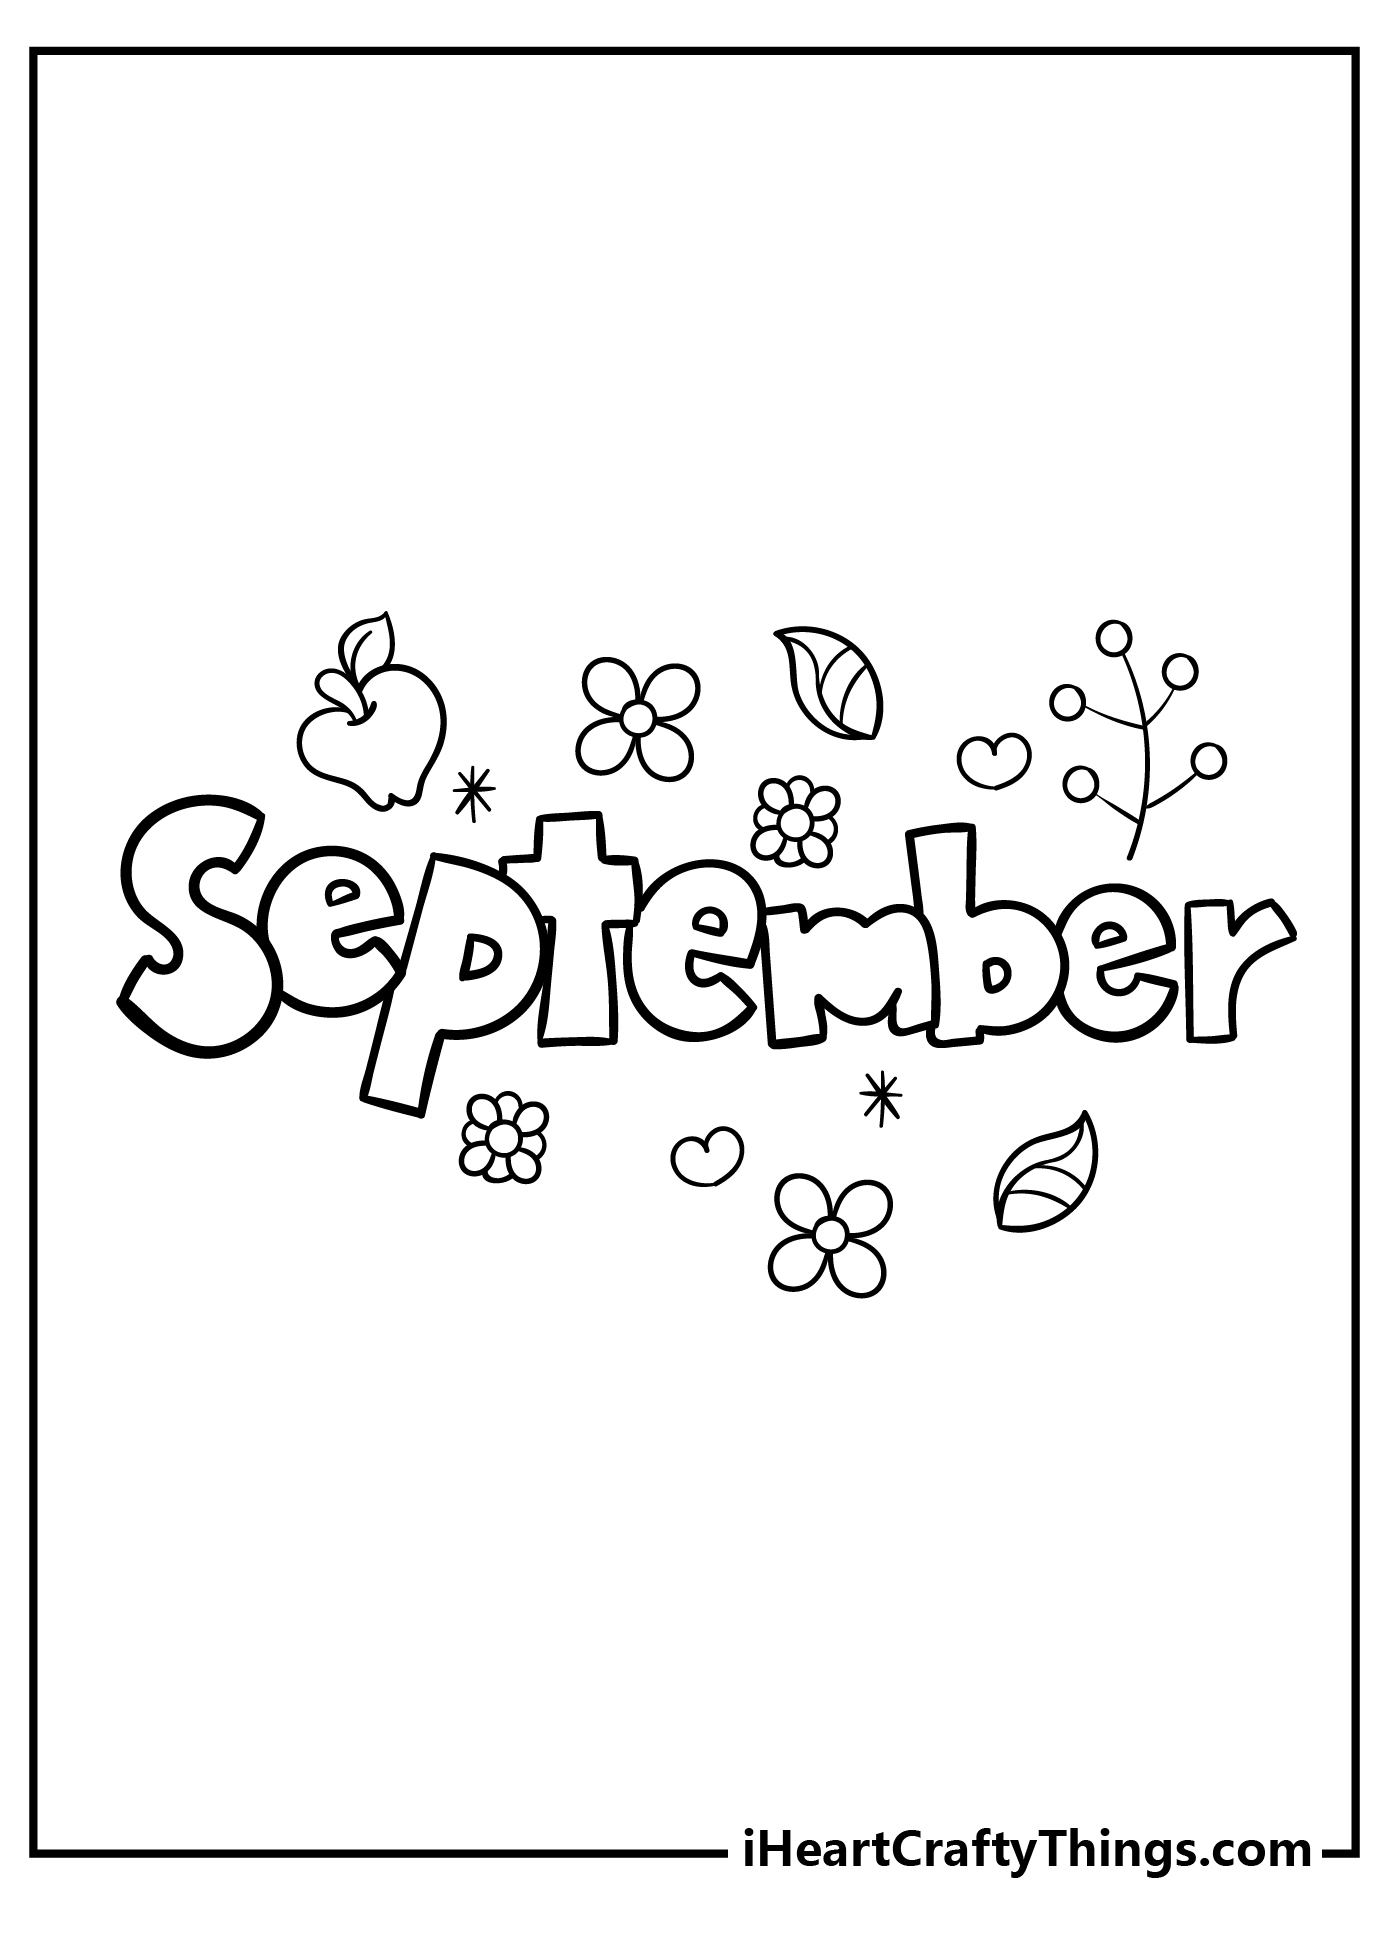 September Coloring Pages for kids free download